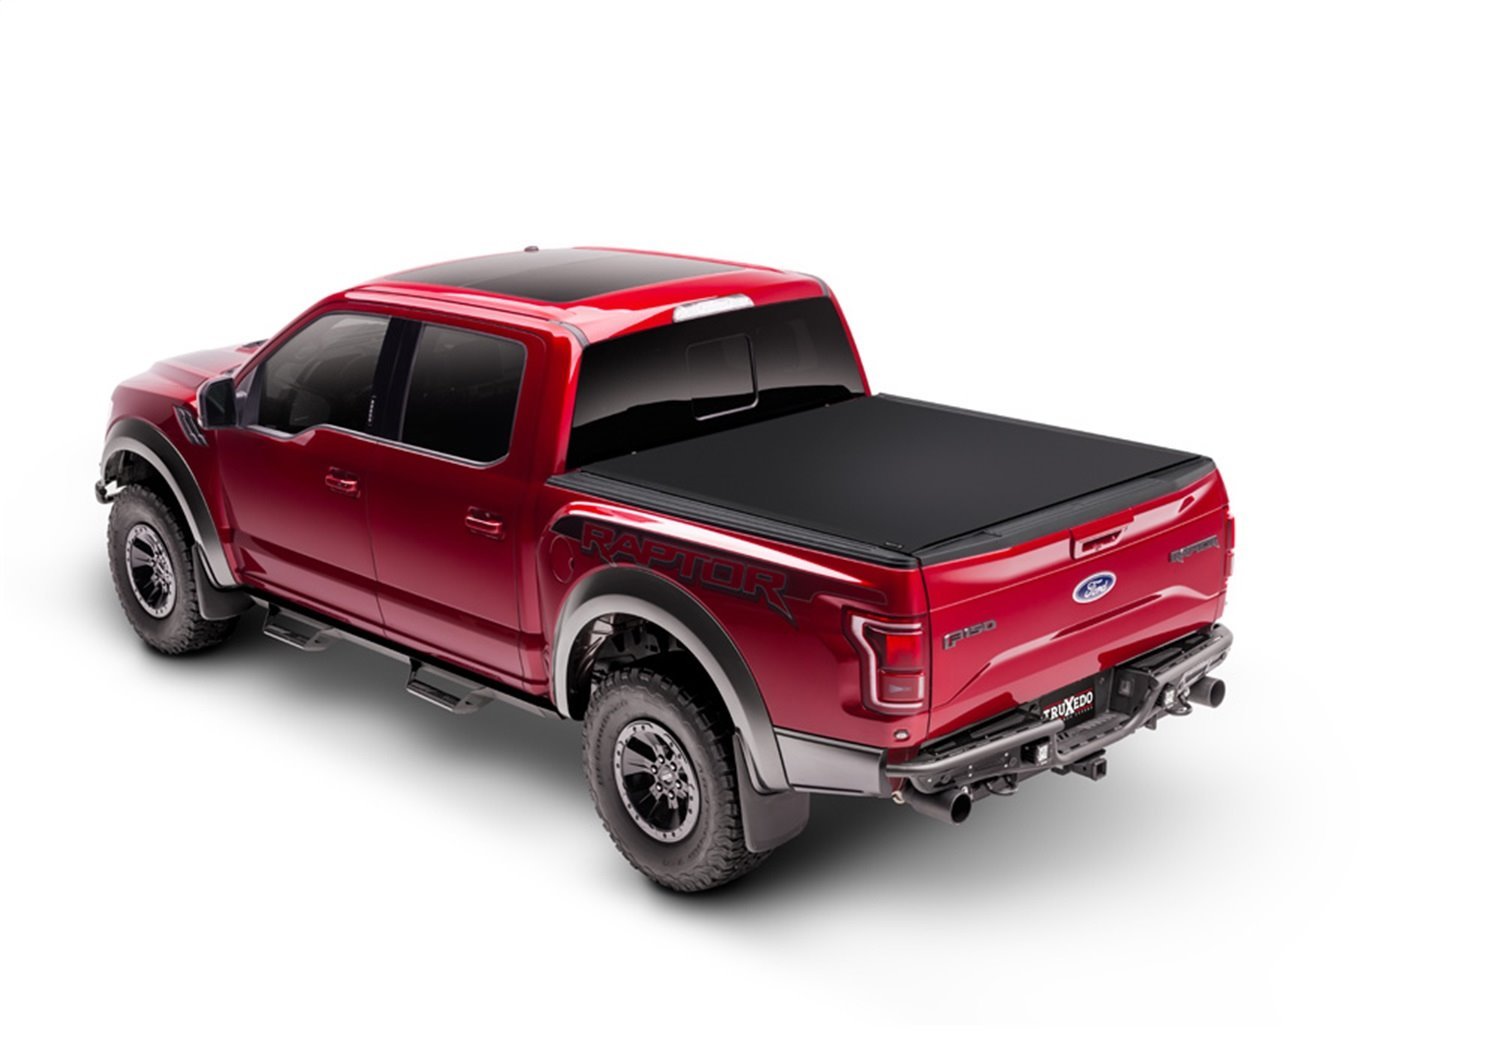 1569616 Sentry CT Hard Roll-Up Tonneau Cover for 2008-2016 Ford F-250/350/450 Super Duty w/8 ft. 2 in. Bed [Matte Black]